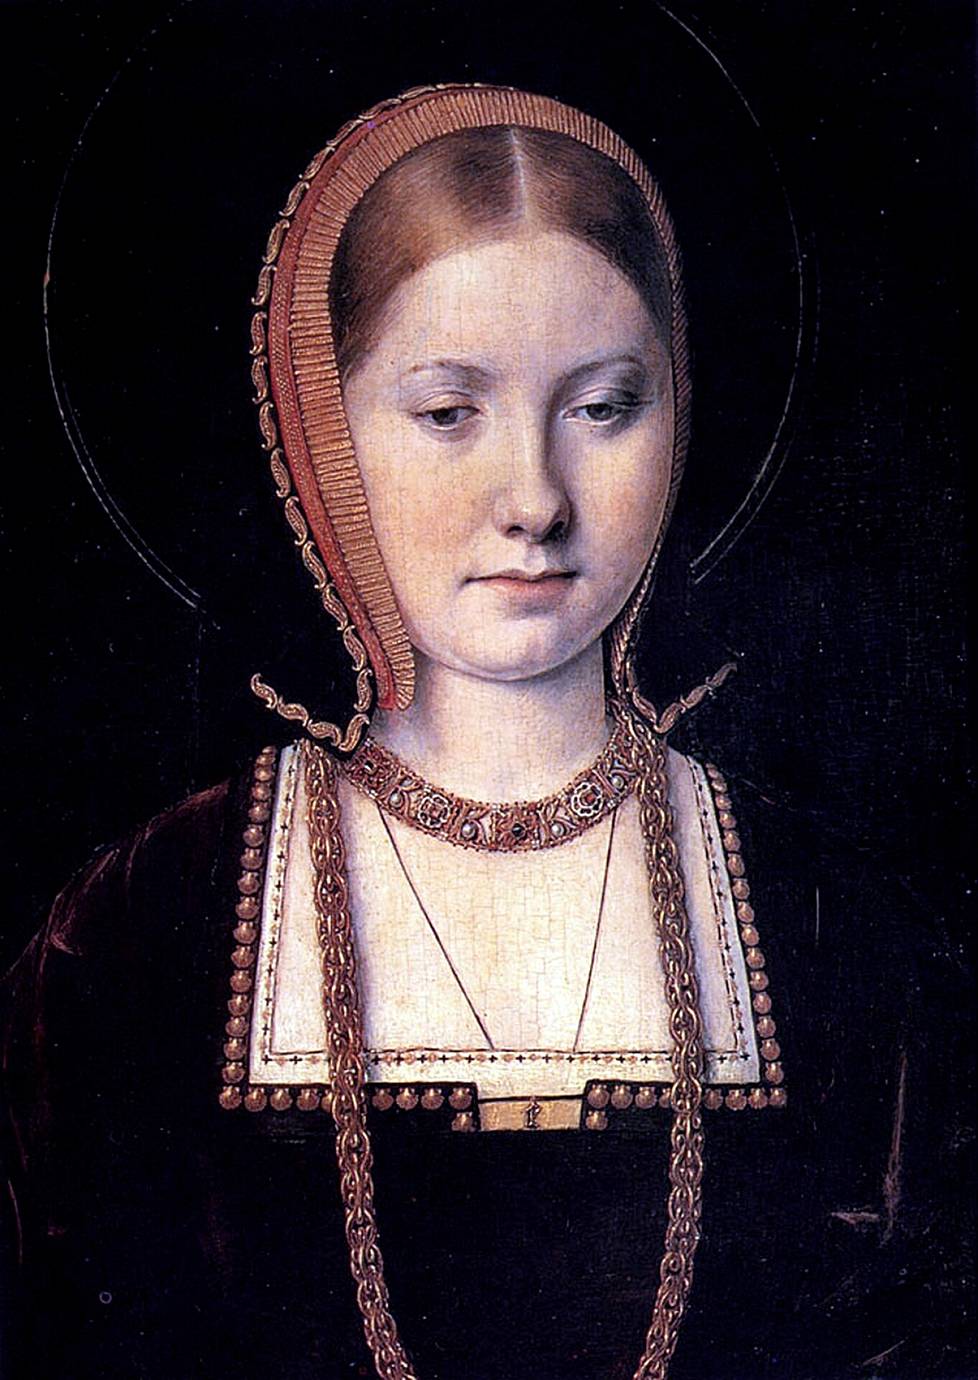 The king's first wife, Catherine of Aragon, was the widow of Henry's brother.